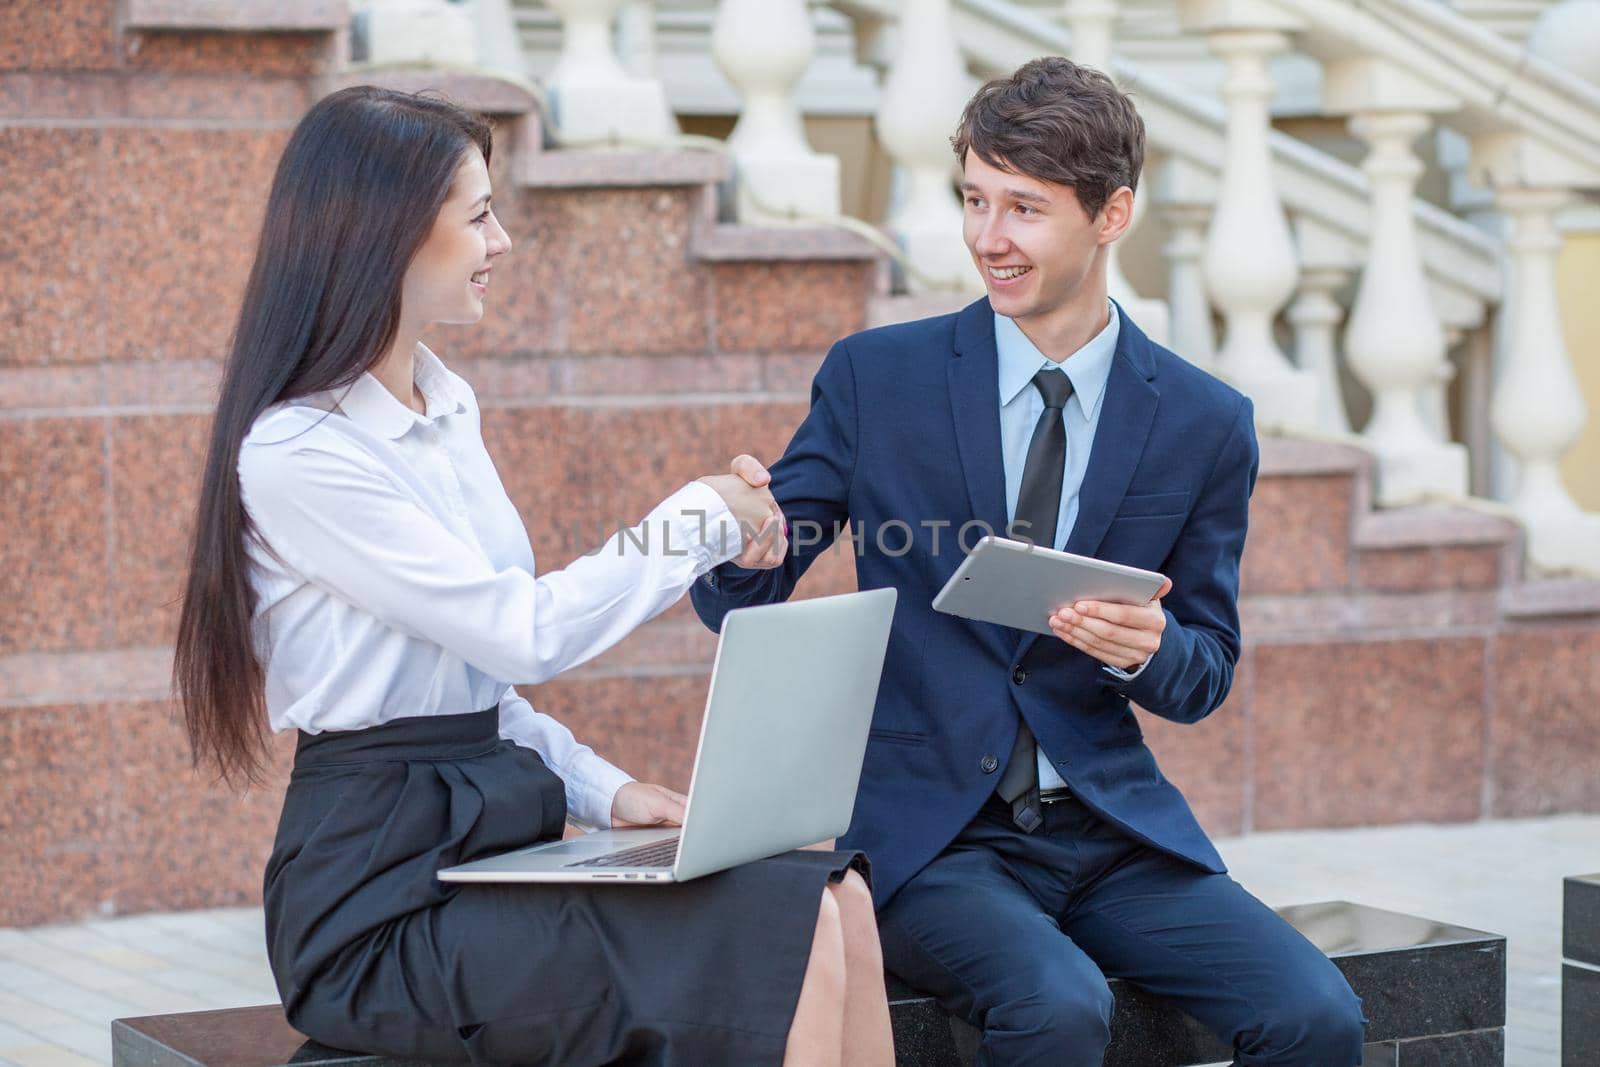 Boss in blue suit and his assistant in white blouse and black skirt discussing their work outdoors.